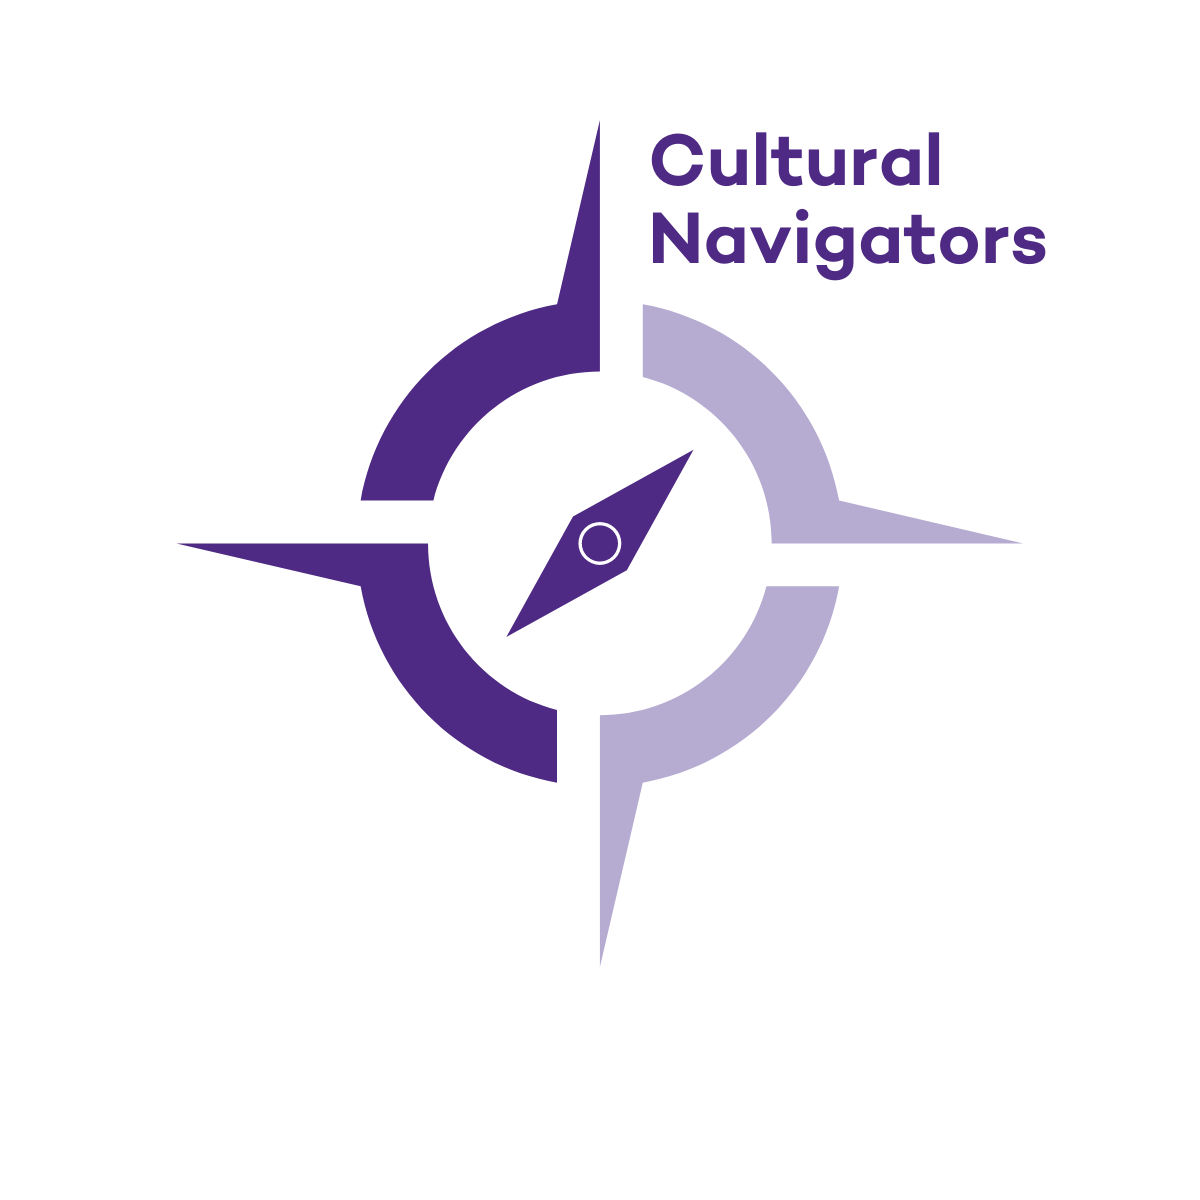 image of a compass with the words Cultural Navigators